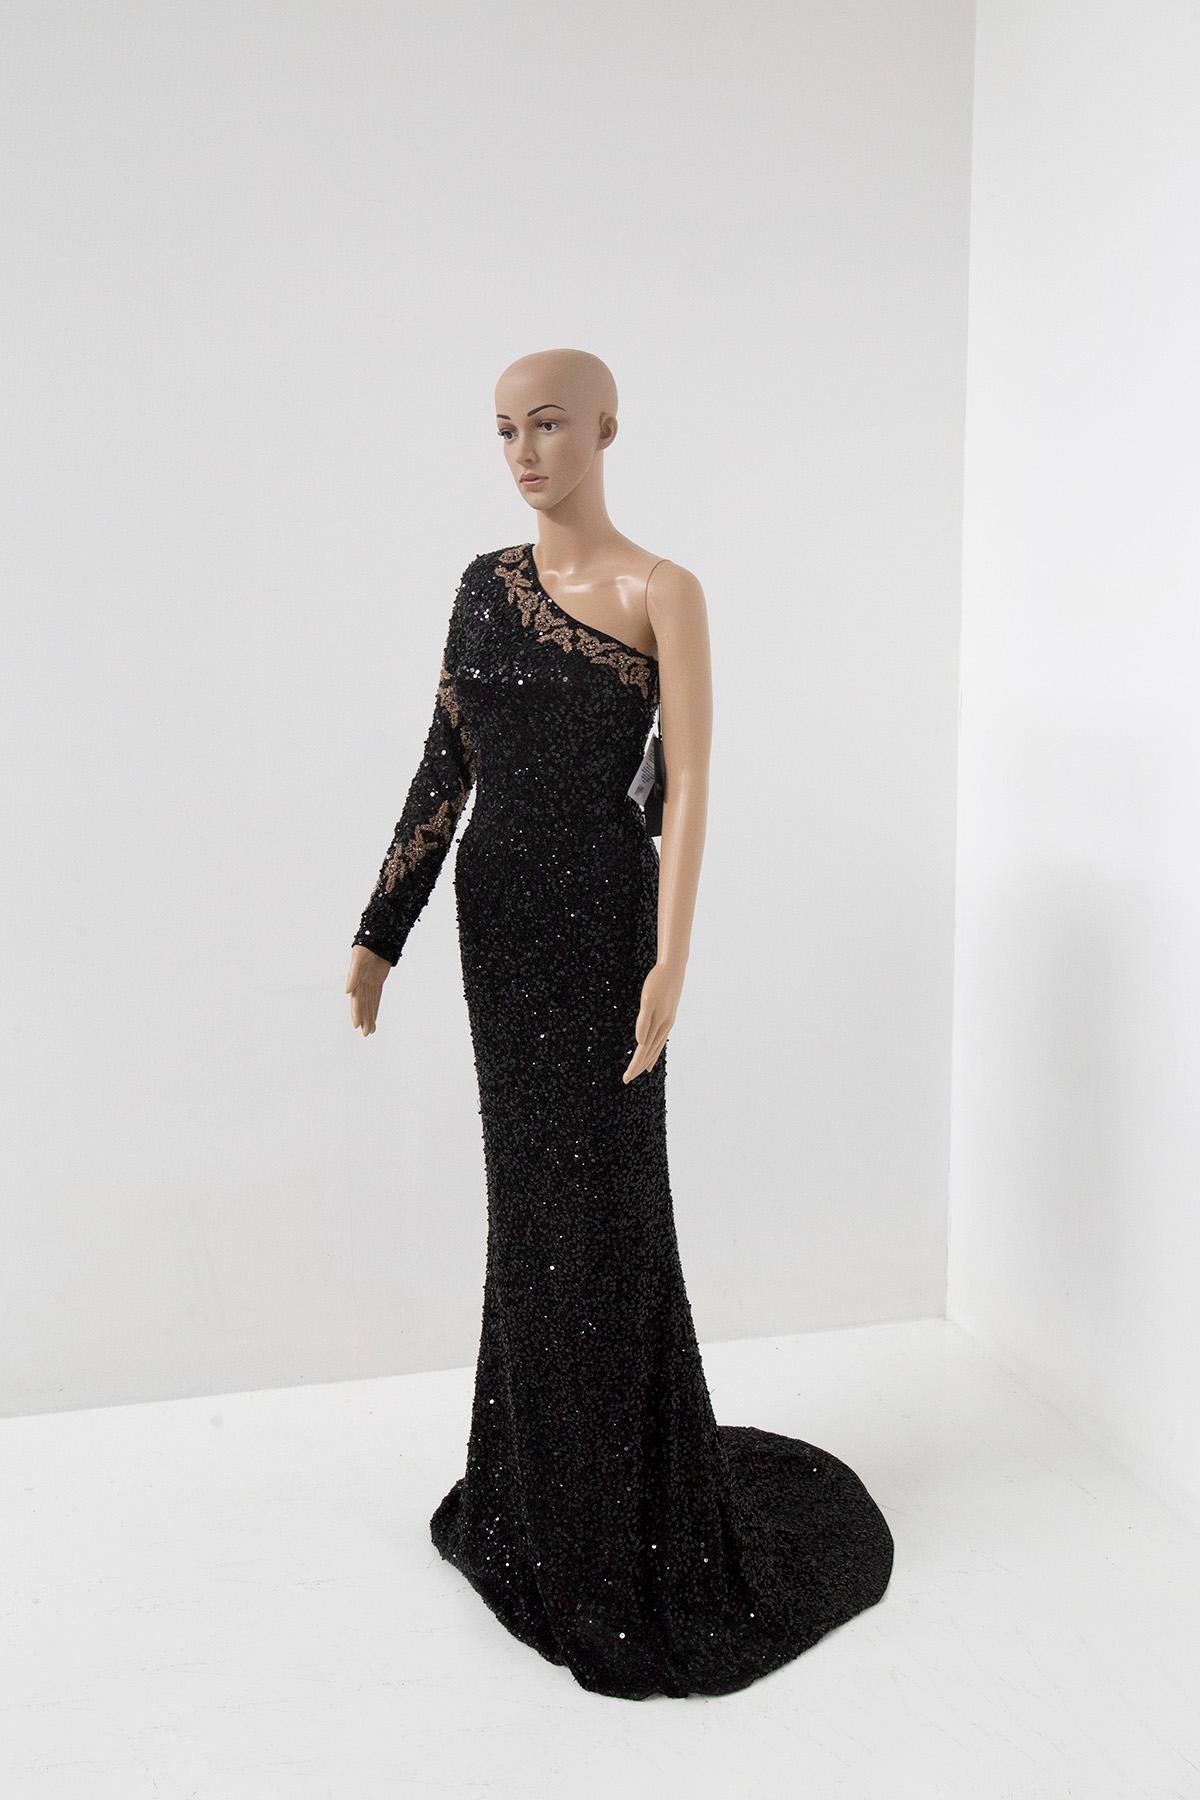 In the dimly lit room, she stood poised and elegant, a vision of timeless beauty. Her one-shoulder black evening gown, adorned with intricate black sequin embellishments, glistened like a thousand stars against the night sky. Each sequin had been